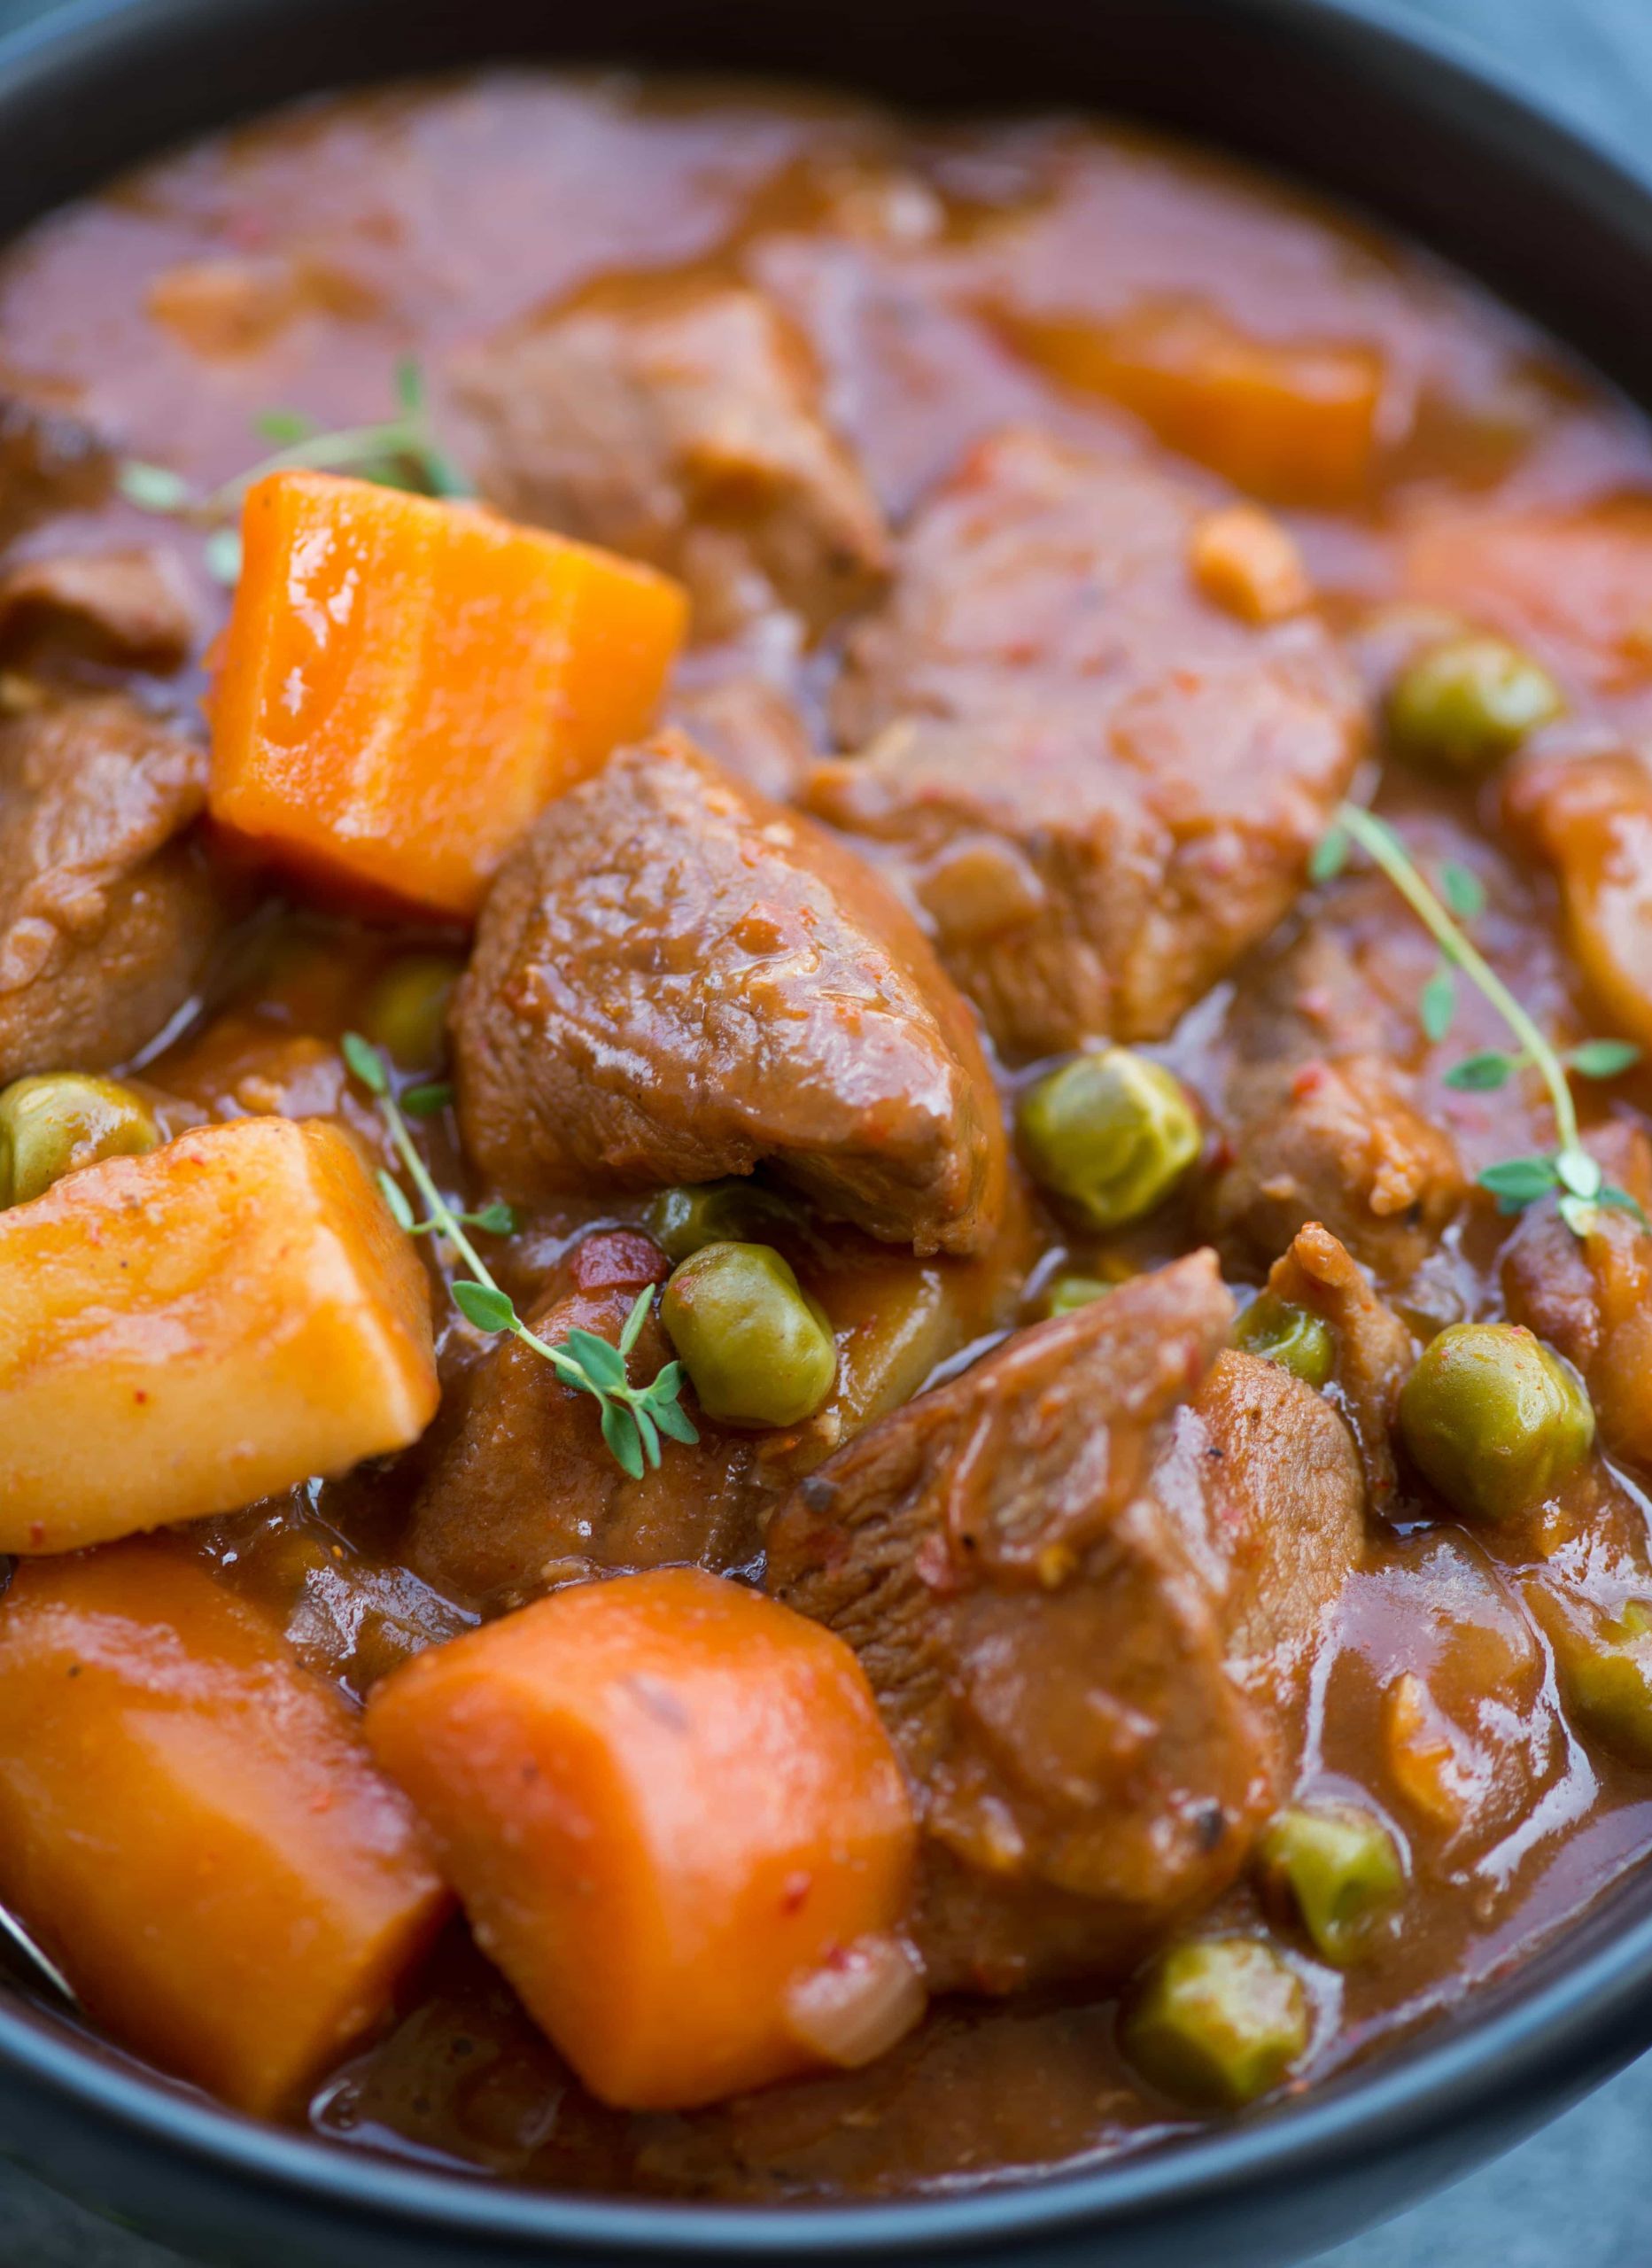 Lamb Stew Recipes Slow Cooker
 SLOW COOKER LAMB STEW The flavours of kitchen